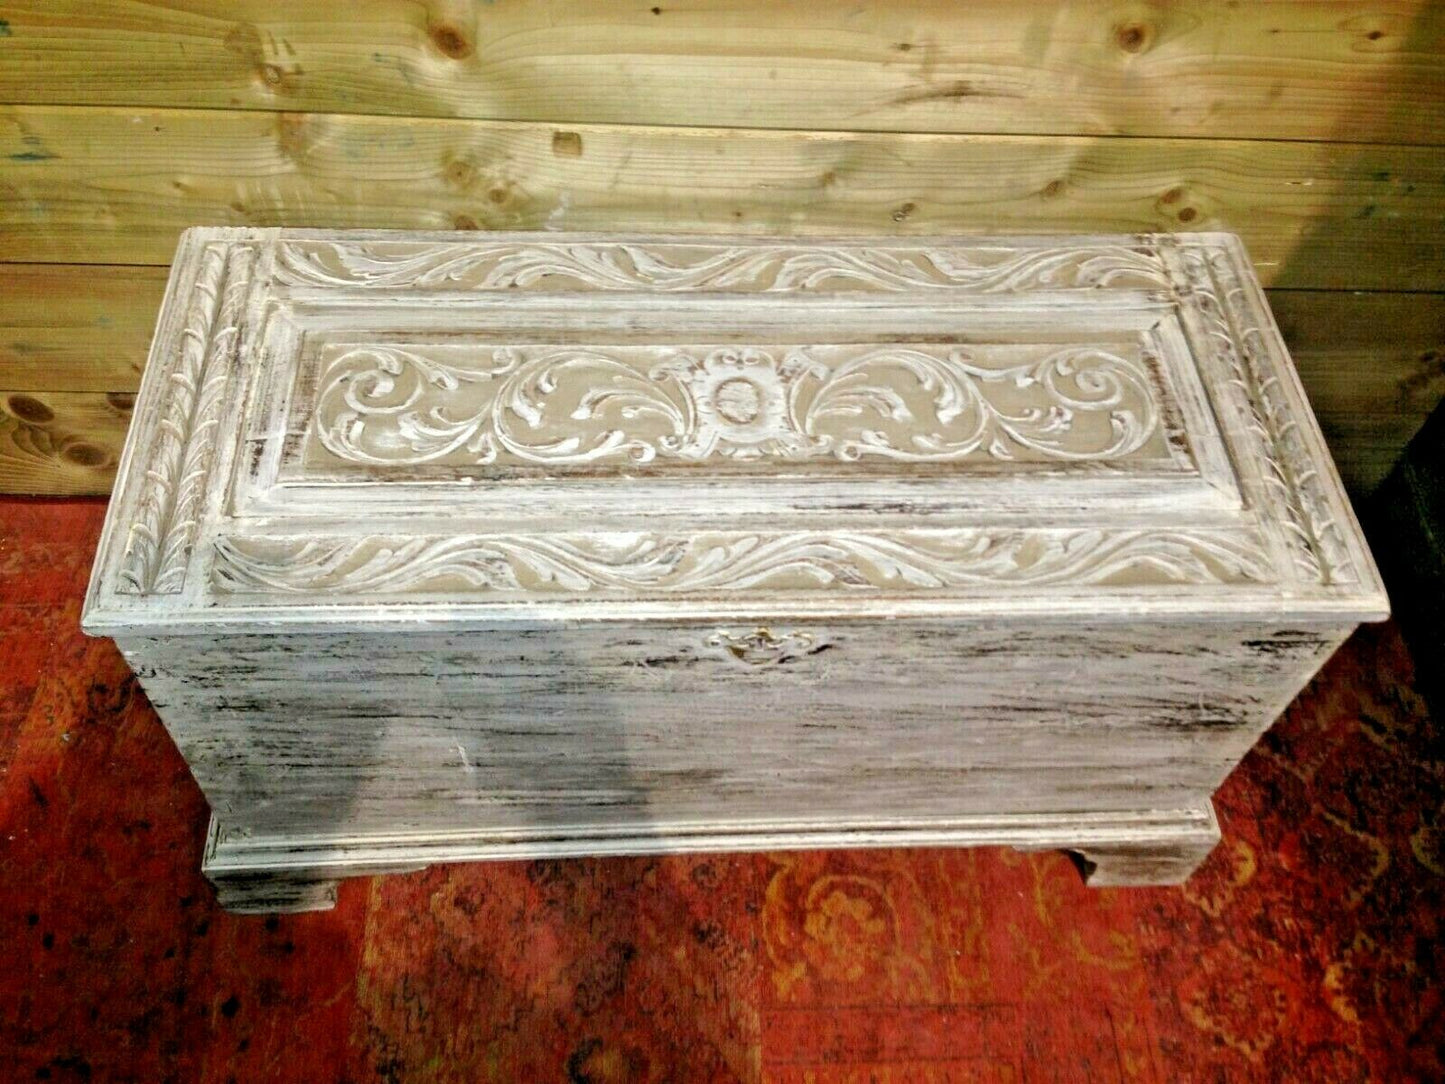 000968...Gorgeous Antique Carved Coffer / Smaller Antique Storage Chest (sold)